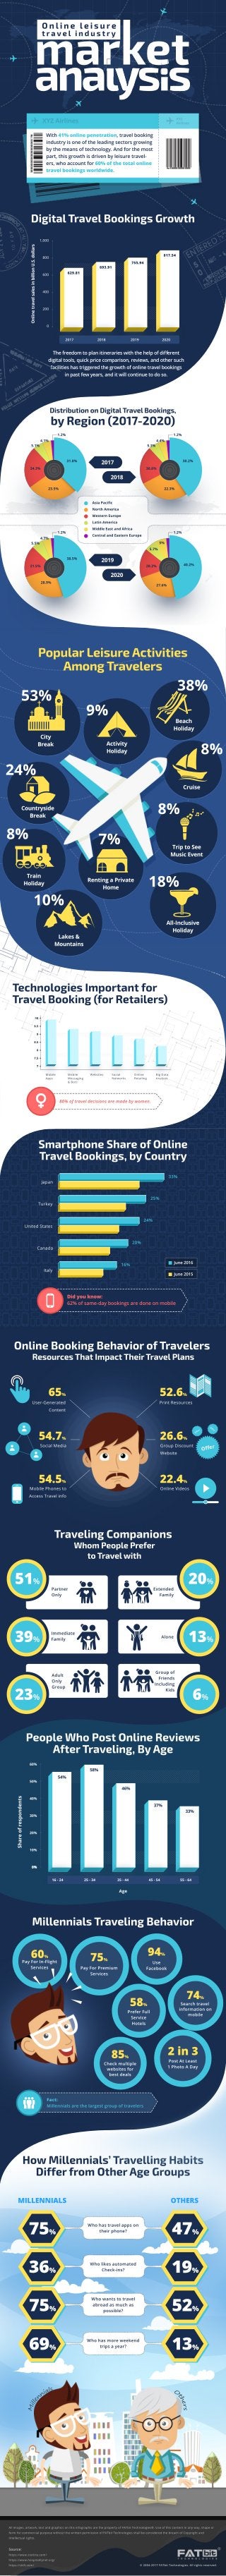 DigitalTravelBookingsGrowth
DistributiononDigitalTravelBookings,
byRegion(2017-2020)
TechnologiesImportantfor
TravelBooking(forRetailers)
SmartphoneShareofOnline
TravelBookings,byCountry
OnlineBookingBehaviorofTravelers
ResourcesThatImpactTheirTravelPlans
TravelingCompanions
WhomPeoplePrefer
toTravelwith
PeopleWhoPostOnlineReviews
AfterTraveling,ByAge
////////////////////////////////////////////////////////////////////////////////////
////////////////////////////////////////////////////////////////////////////////////
////////////////////////////////////////////////////////////////////////////////////
60%
50%
40%
30%
20%
10%
0%0%
16-24
Shareofrespondents
Age
25-34 35-44 45-54 55-64
54%
58%
46%
37%
33%
HowMillennials’TravellingHabits
DifferfromOtherAgeGroups
MILLENNIALS OTHERS
PopularLeisureActivities
AmongTravelers
With41% onlinepenetration,travelbooking
industryisoneoftheleadingsectorsgrowing
bythemeansoftechnology.Andforthemost
part,thisgrowthisdrivenbyleisuretravel-
ers,whoaccountfor60% ofthetotalonline
travelbookingsworldwide.
Thefreedom toplanitinerarieswiththehelpofdiﬀerent
digitaltools,quickpricecomparison,reviews,andothersuch
facilitieshastriggeredthegrowthofonlinetravelbookings
inpastfewyears,anditwillcontinuetodoso.
XYZAirlines XYZ
Airlines
///////////////////////////////////////////////////////////////////////////////
///////////////////////////////////////////////////////////////////////////////////////////////////////////////////
///////////////////////////////////////////////////////////////////////////////////////////////////////////////////
///////////////////////////////////////////////////////////////////////////////
1,000
800
600
400
200
0
2017
OnlinetravelsalesinbillionU.S.dollars
2018 2019 2020
629.81
693.91
755.94
817.54
2017
2018
2019
City
Break
53%
9%
38%
8%
Activity
Holiday
Beach
Holiday
Cruise
24%
Countryside
Break
8%
TriptoSee
MusicEvent
8%
10%
7%
Train
Holiday
RentingaPrivate
Home
Lakes&
Mountains
18%
All-Inclusive
Holiday
2020
AsiaPaciﬁc
NorthAmerica
WesternEurope
LatinAmerica
MiddleEastandAfrica
CentralandEasternEurope
Japan
June2015
June2016
33%
25%
65%
54.7%
54.5%
24%
20%
16%
Turkey
UnitedStates
User-Generated
Content
SocialMedia
MobilePhonesto
AccessTravelinfo
52.6%
26.6%
22.4%
PrintResources
GroupDiscount
Website
OnlineVideos
Canada
Italy
Partner
Only
Extended
Family
Alone
Groupof
Friends
Including
Kids
Immediate
Family
Adult
Only
Group
51%
39%
23%
20%
13%
6%
///////////////////////////////////////////////////////////////////////////////
80%oftraveldecisionsaremadebywomen.
Didyouknow:
62%ofsame-daybookingsaredoneonmobile
Oﬀer
Oﬀer
Oﬀer
47%
Whohastravelappson
theirphone?
36% 19%
Wholikesautomated
Check-ins?
75% 52%
Whowantstotravel
abroadasmuchas
possible?
69% 13%
Whohasmoreweekend
tripsayear?
75%
analysis
Onlineleisure
travelindustry
MillennialsTravelingBehavior
60%
PayForIn-Flight
Services
75%
PayForPremium
Services
58%
PreferFull
Service
Hotels
94%
Use
Facebook
74%
Searchtravel
informationon
mobile
2in3
PostAtLeast
1PhotoADay
85%
Checkmultiple
websitesfor
bestdeals
Fact:
Millennialsarethelargestgroupoftravelers
©2004-2017FATbitTechnologies.Allrightsreserved.
Allimages,artwork,textandgraphicsonthisinfographicarethepropertyofFATbitTechnologies®.Useofthiscontentinanyway,shapeor
form forcommercialpurposewithoutthewrittenpermissionofFATbitTechnologiesshallbeconsideredthebreachofCopyrightand
Intellectualrights.
Source:
https://www.statista.com/
https://www.hospitalitynet.org/
https://skift.com/
31.8%
23.5%
34.3%
5.1%
4.1%
1.2%
30.2%
22.3%
36.6%
5.3%
4.4%
1.2%
38.5%
28.9%
21.5%
5.5%
4.7%
1.2%
40.2%
27.6%
20.2%
5.7%
5%
1.2%
10
9.5
9
8.5
8
7.5
77
Mobile
Apps
Mobile
Messaging
&Bots
Websites Social
Networks
Online
Retailing
BigData
Analysis
 